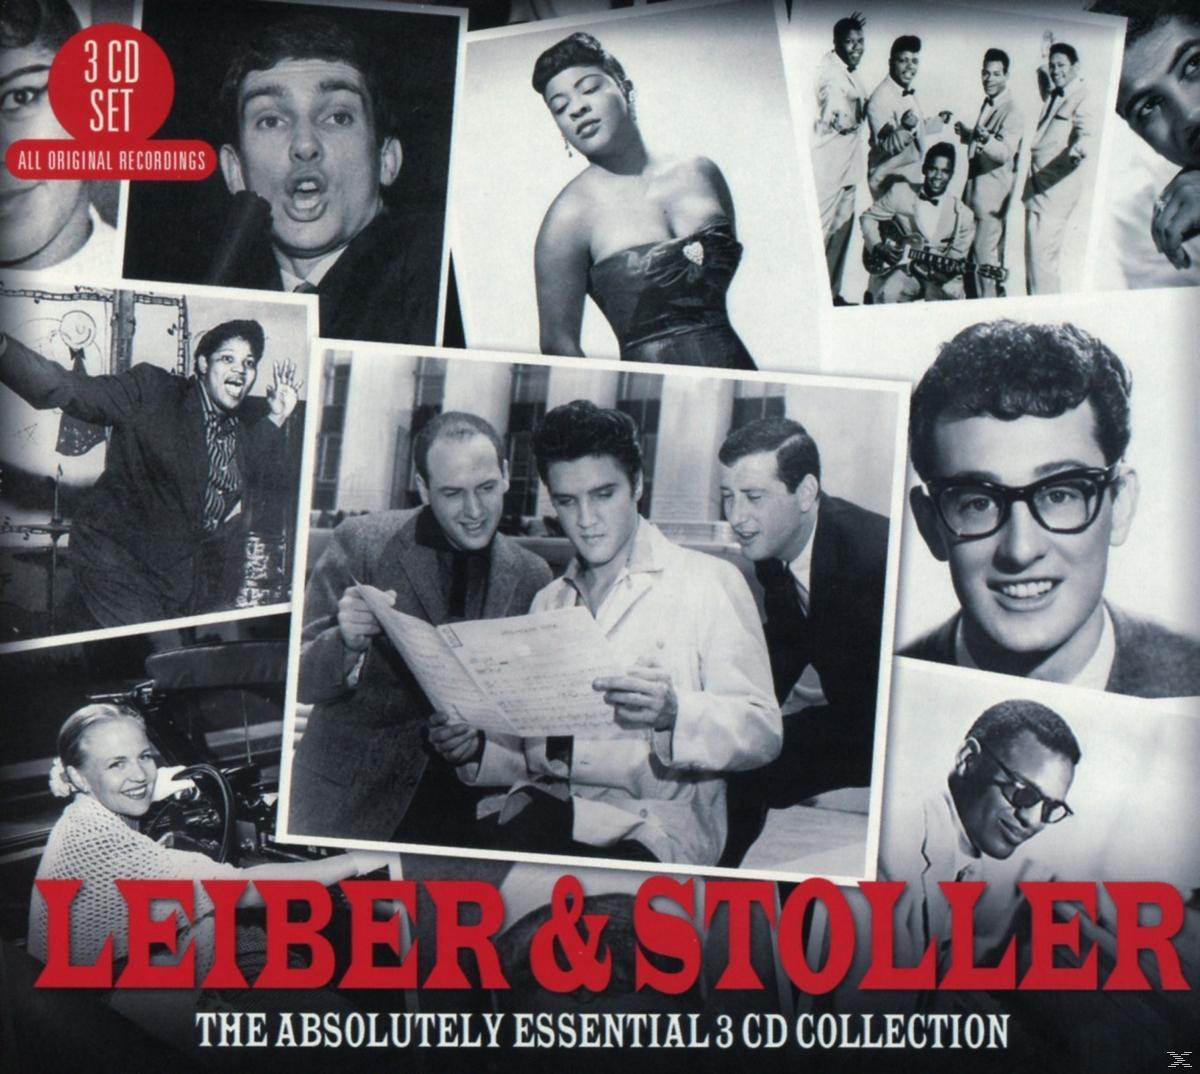 The & 3 (CD) Collection Absolutely Leiber - Essential Stoller - Cd